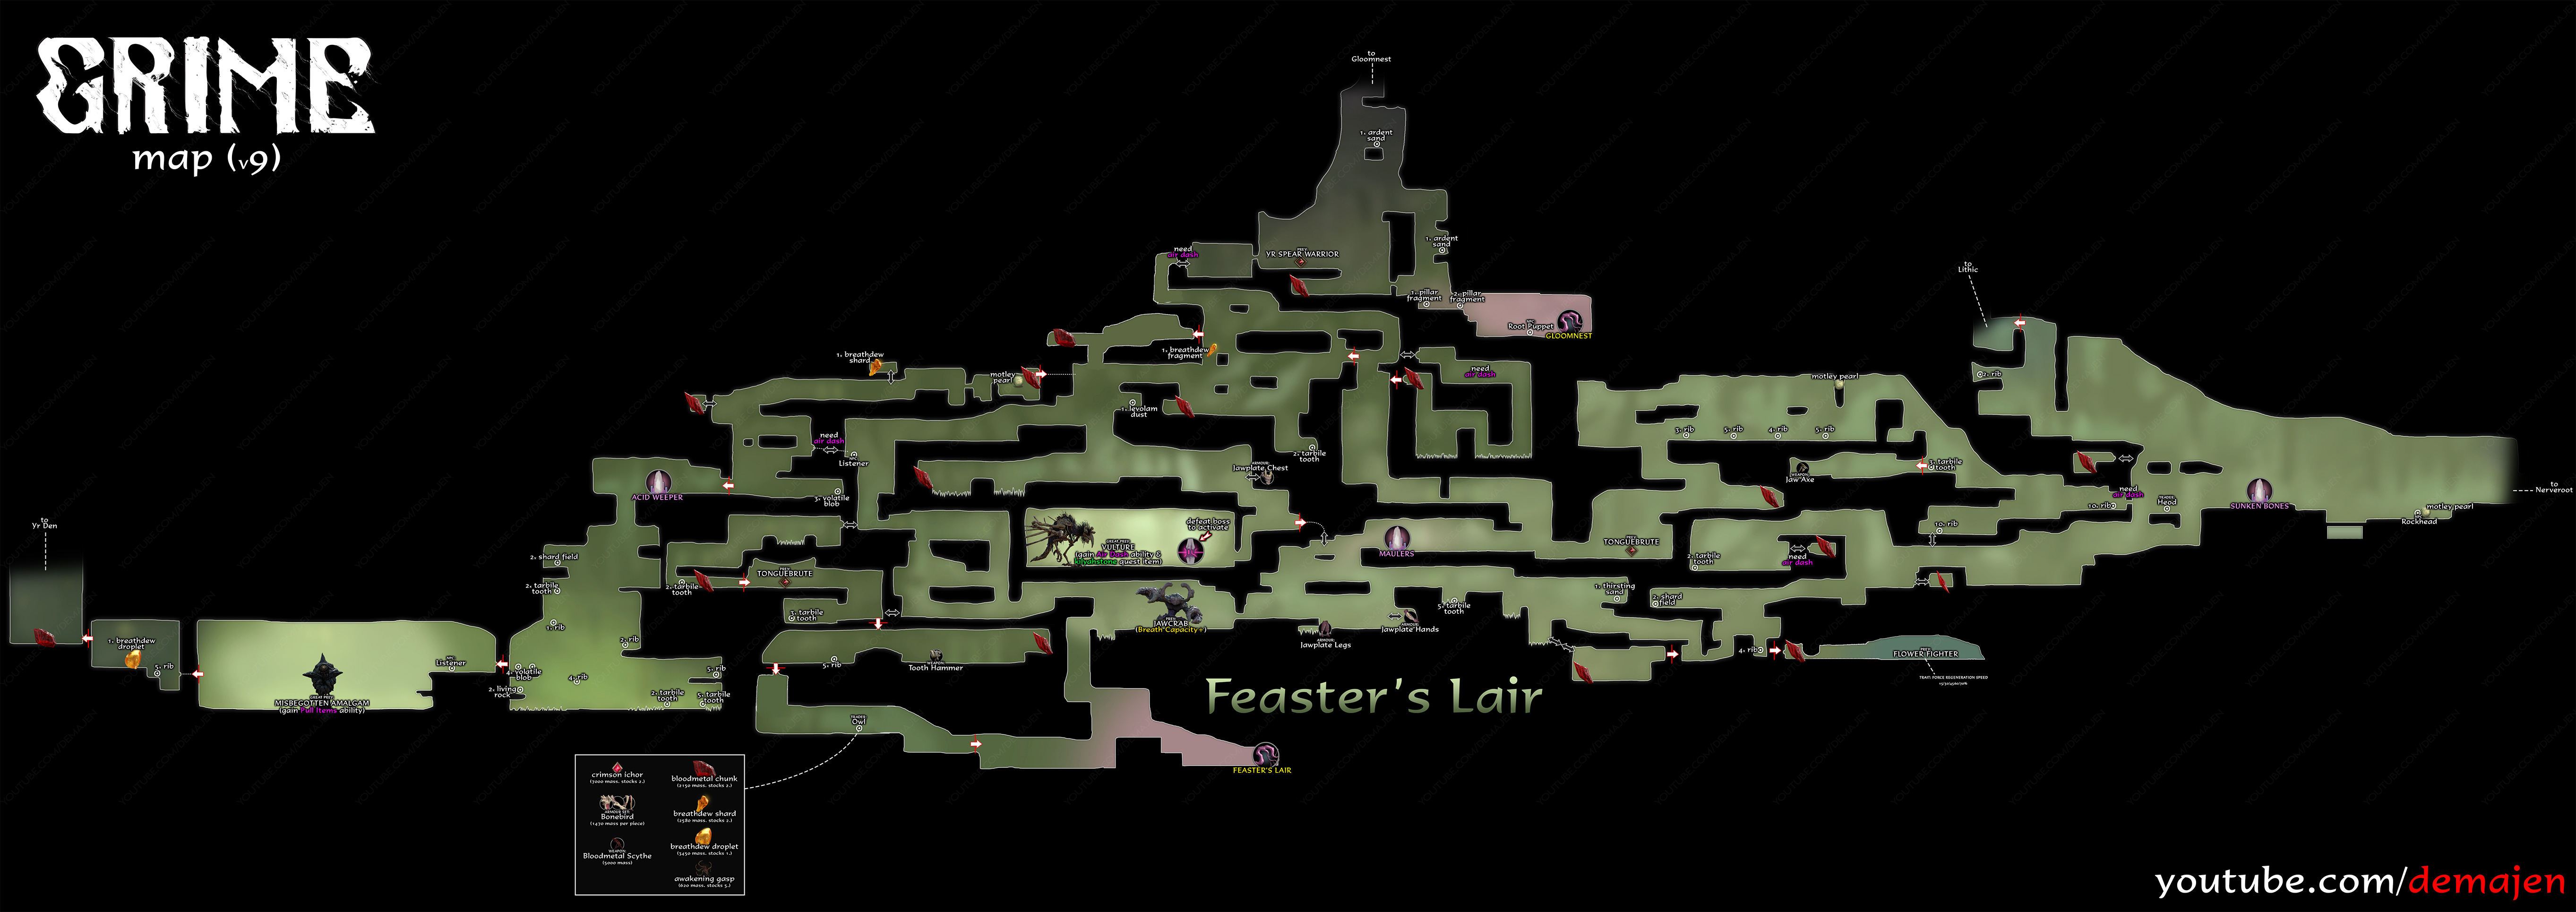 GRIME All Maps in Game + Gameplay Tips and Information - Feaster's Lair (updated for patch 1.0.6.7) - 1B20139